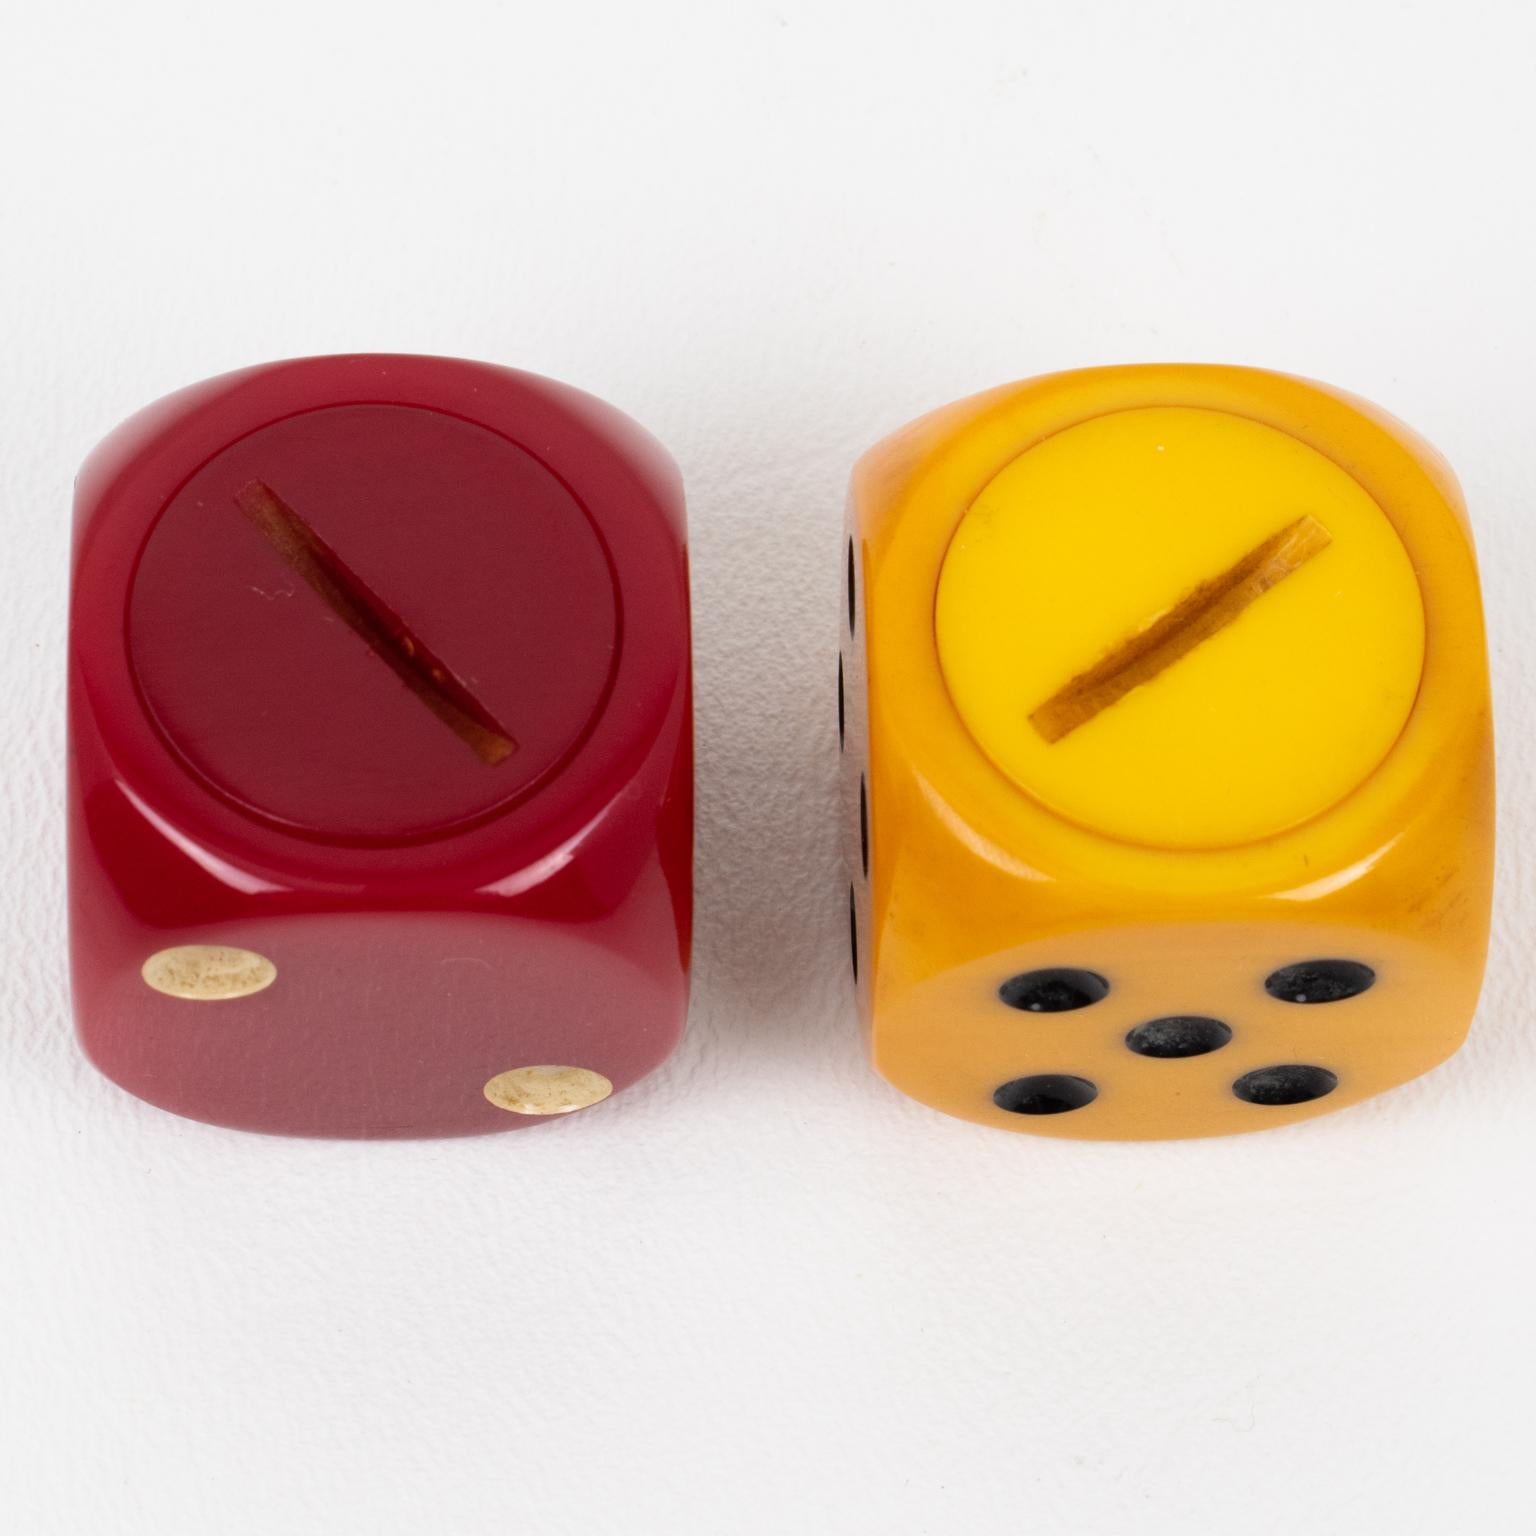 Art Deco Red, Yellow Bakelite Dice-Shaped Condiment Salt and Pepper Shakers Set In Excellent Condition For Sale In Atlanta, GA